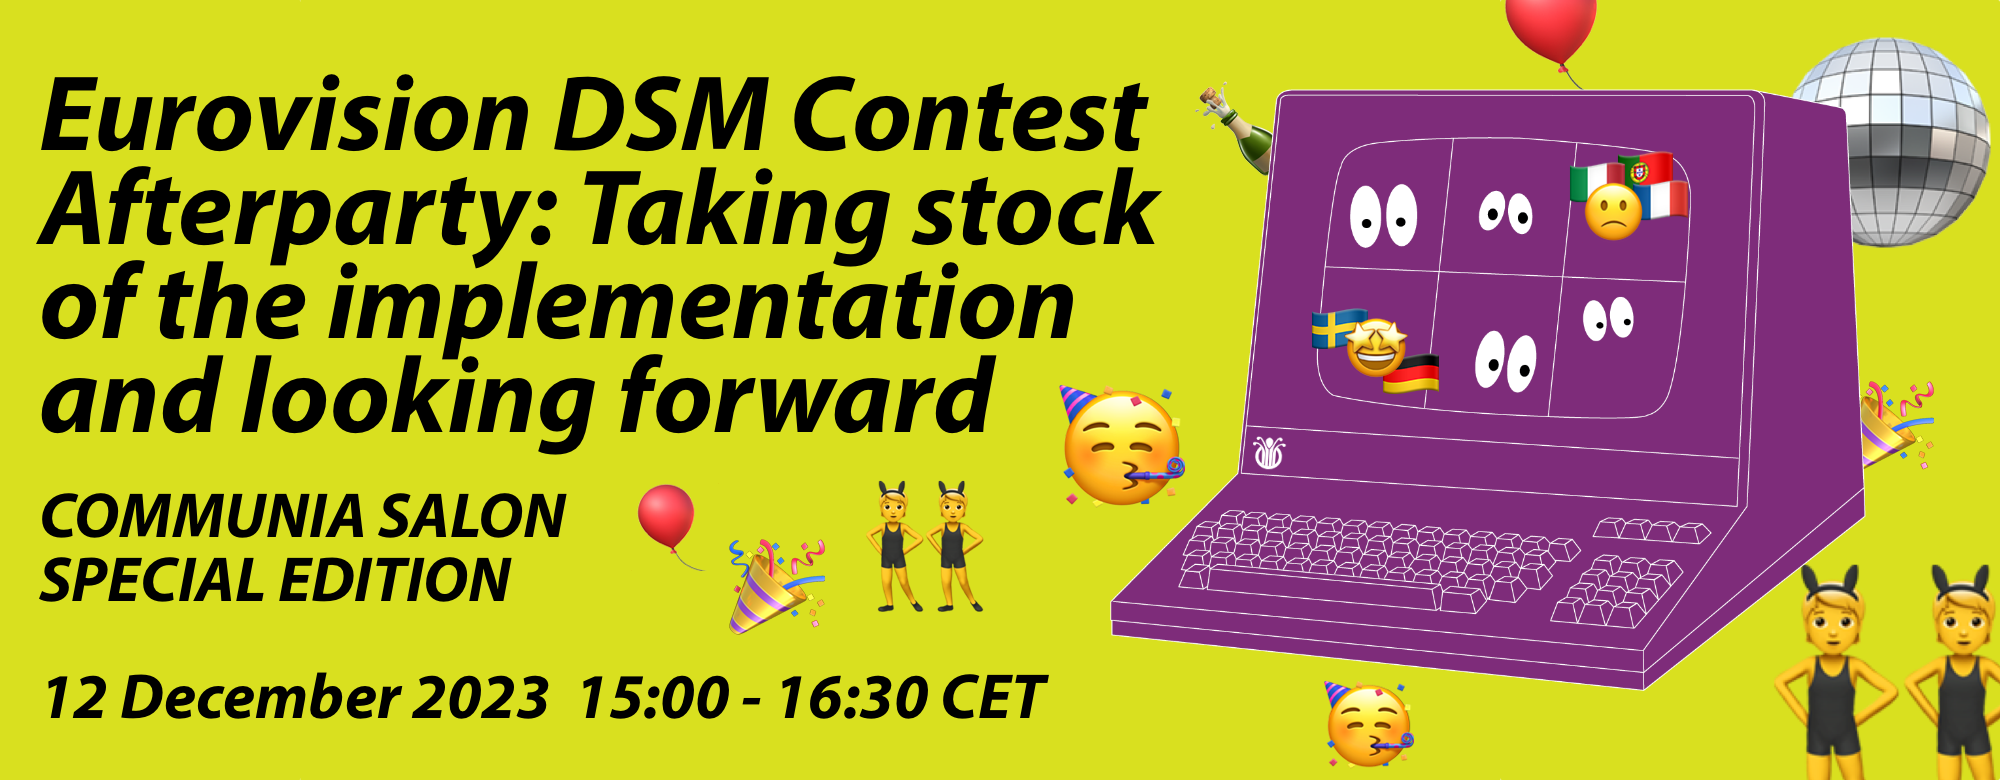 Announcement of COMMUNIA Salon Special Edition entitled "Eurovision DSM Contest Afterparty: Taking stock of the implementation and looking forward" on 12 December 2023, 15:00-16:30 CET